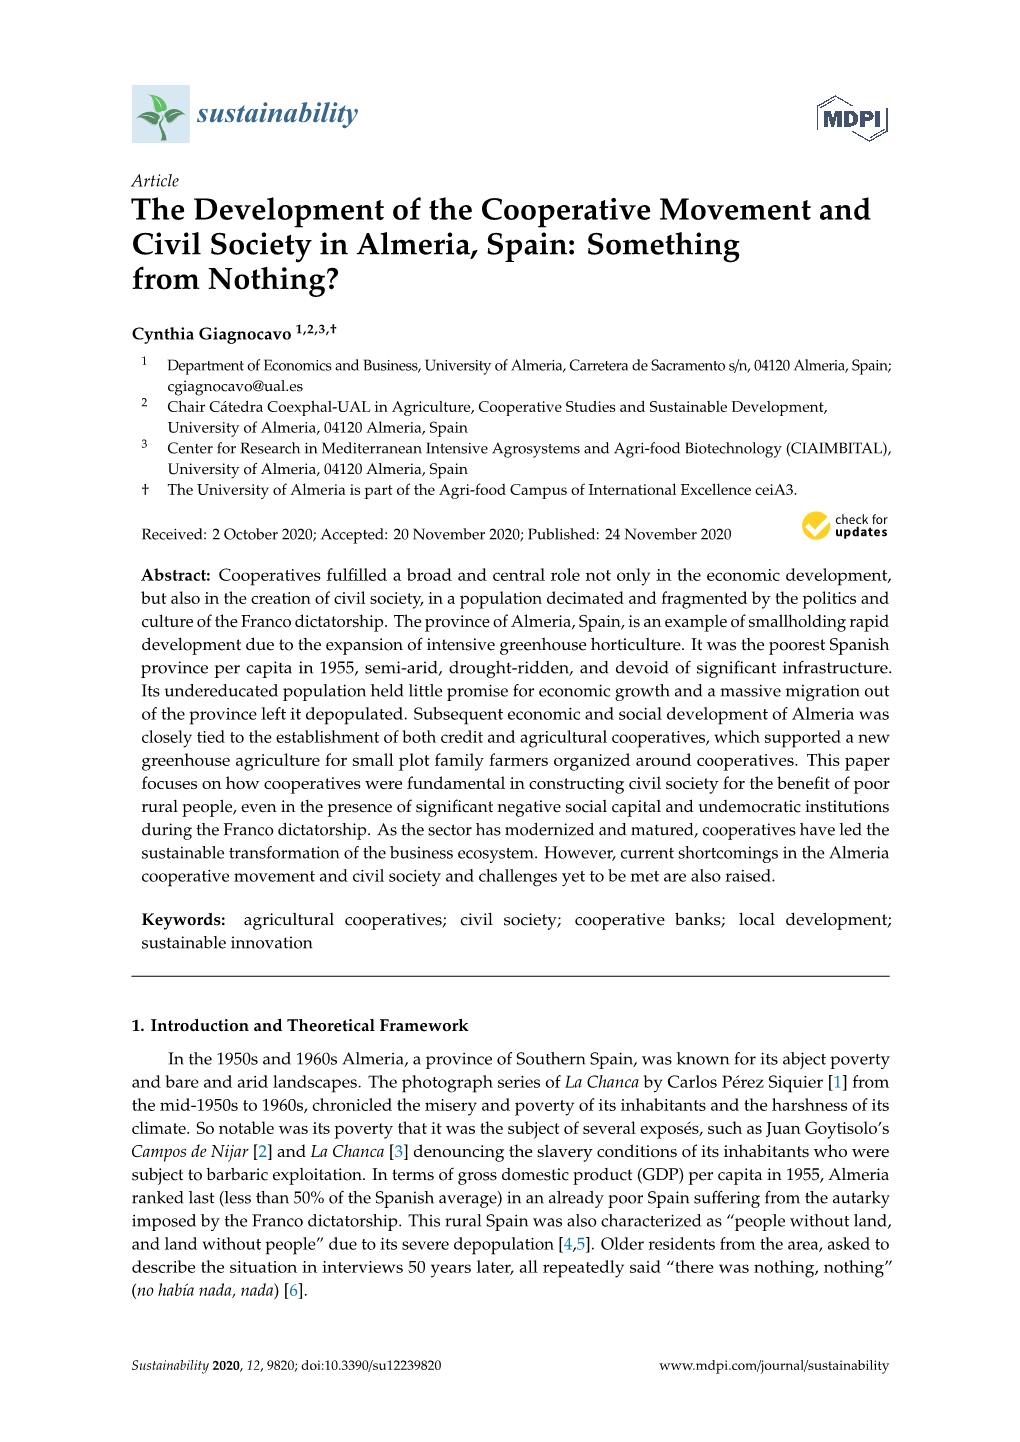 The Development of the Cooperative Movement and Civil Society in Almeria, Spain: Something from Nothing?